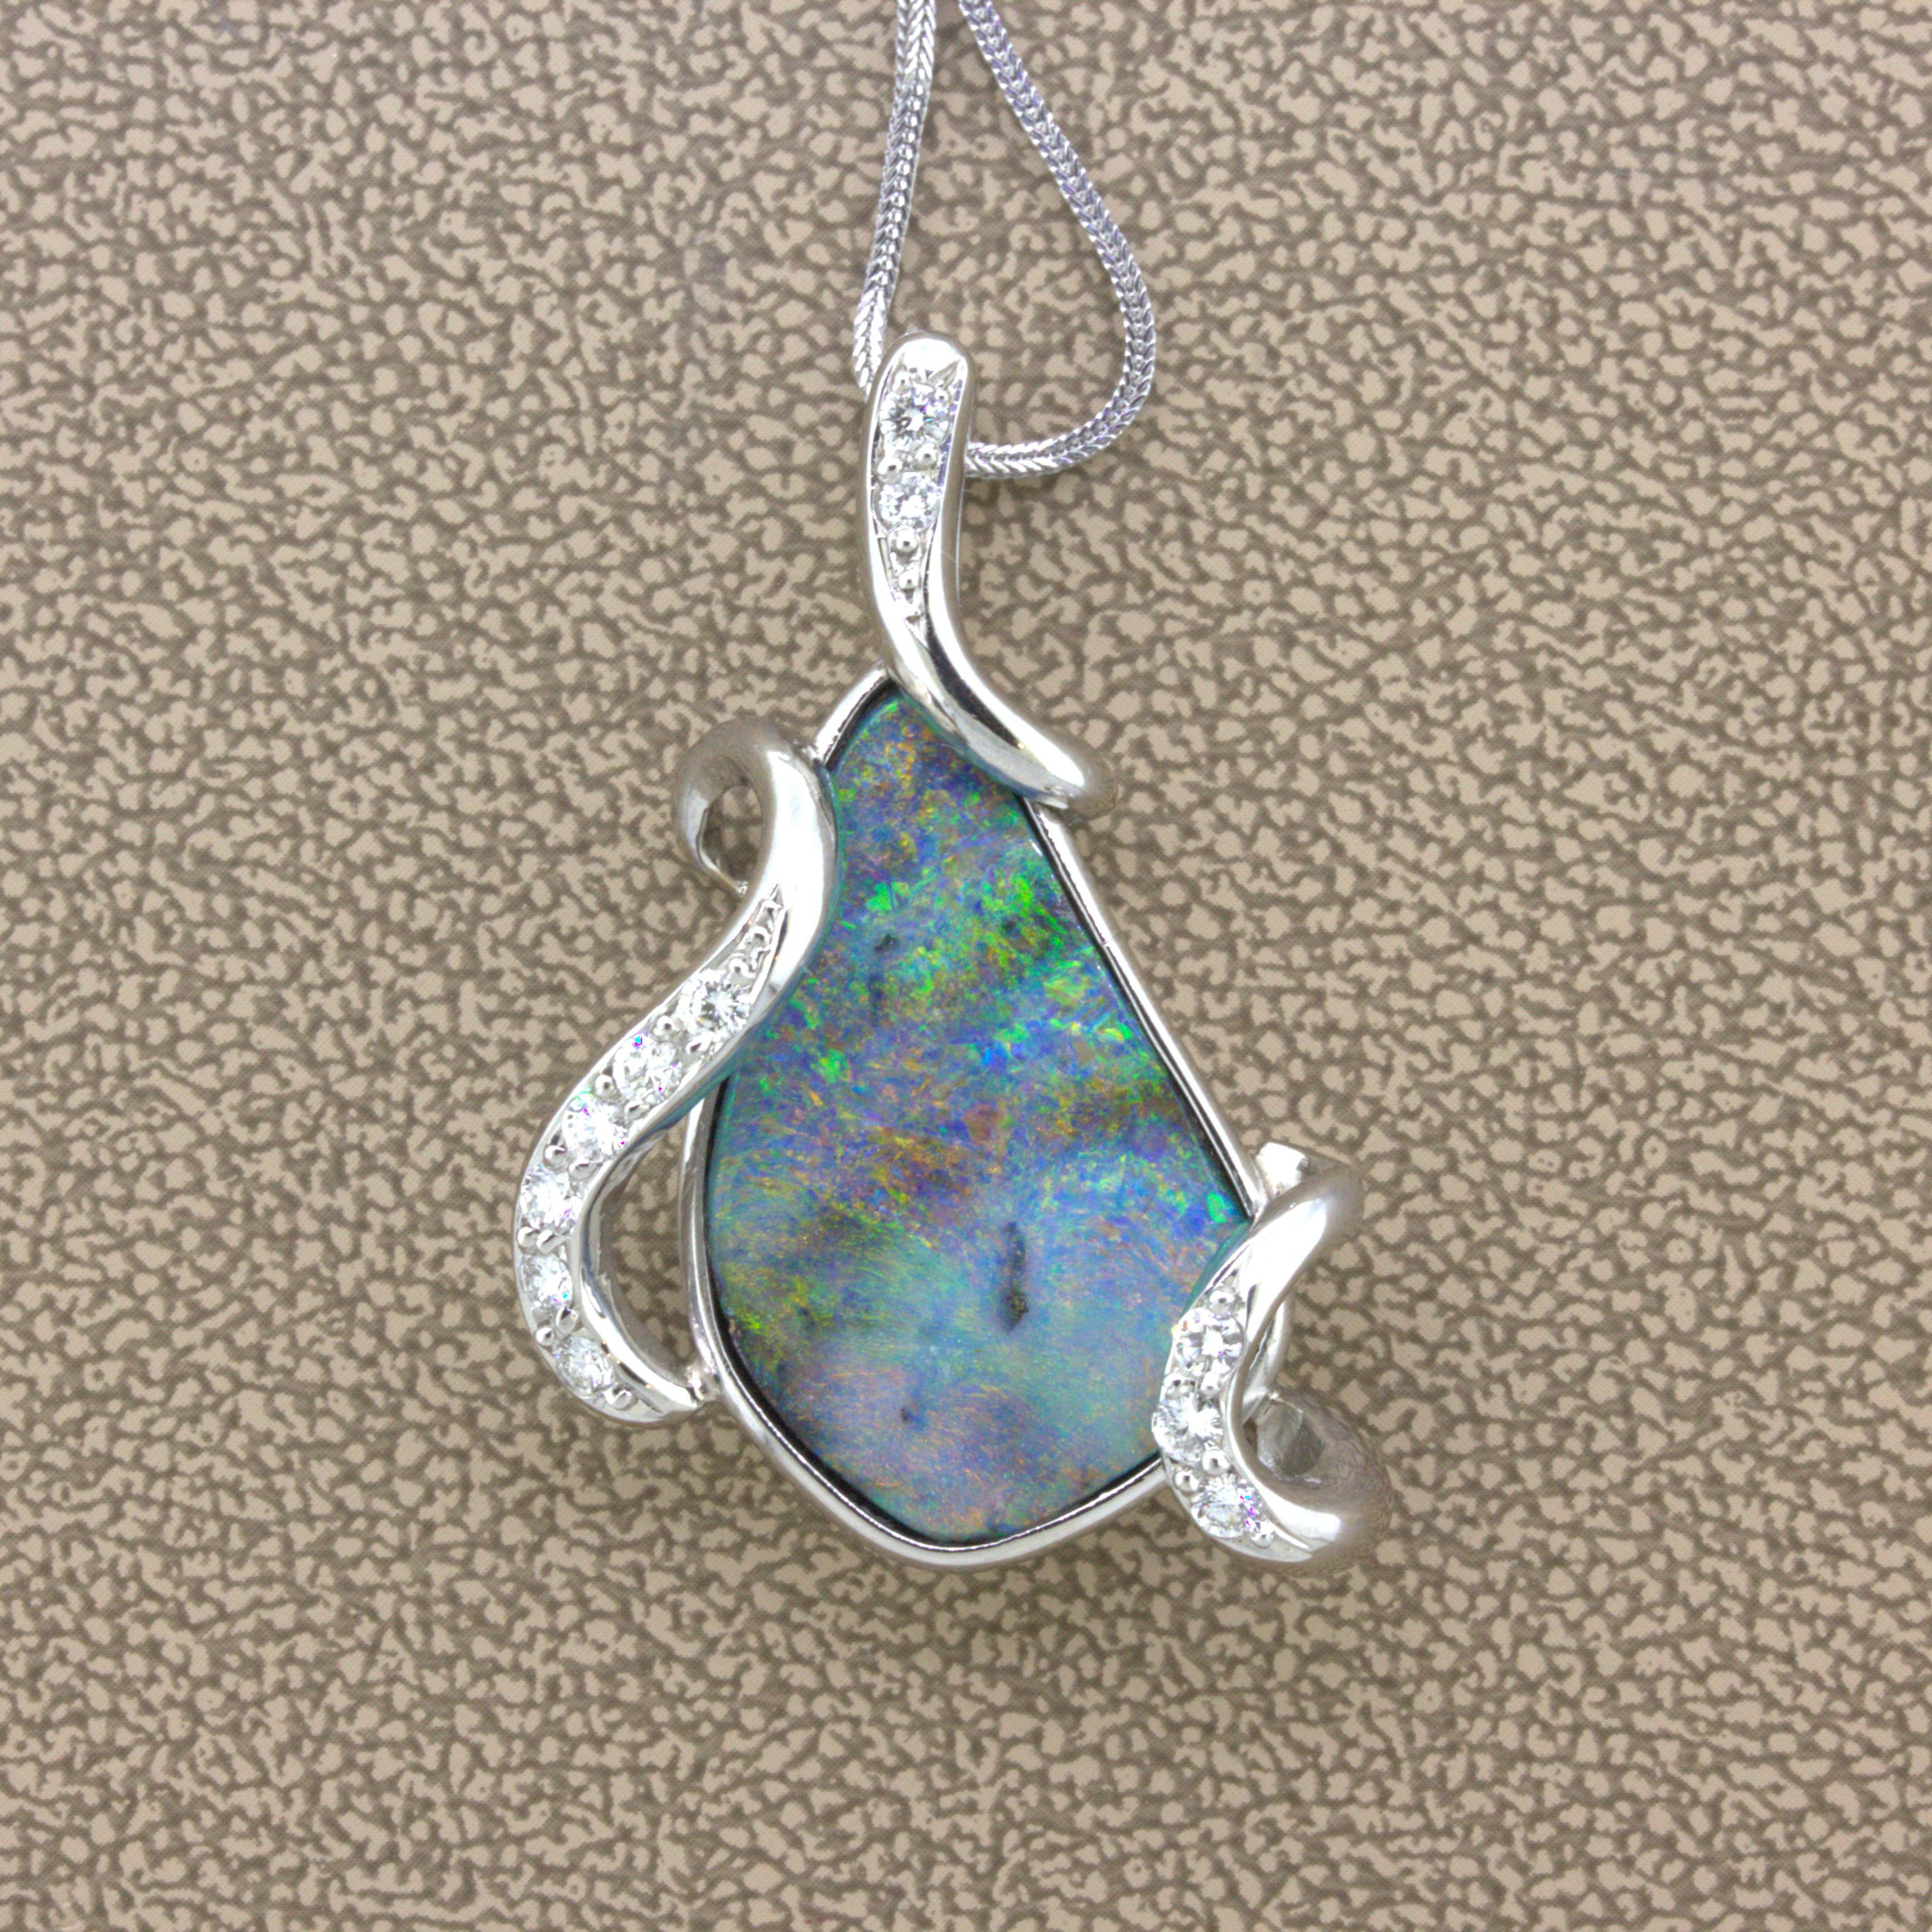 A lovely example of the beauty of Australian boulder opal. This piece weighs approximately 10 carats and shows just about every color in a soft brush stroke pattern. It is complemented by 0.34 carats of round brilliant-cut diamonds set in a curving